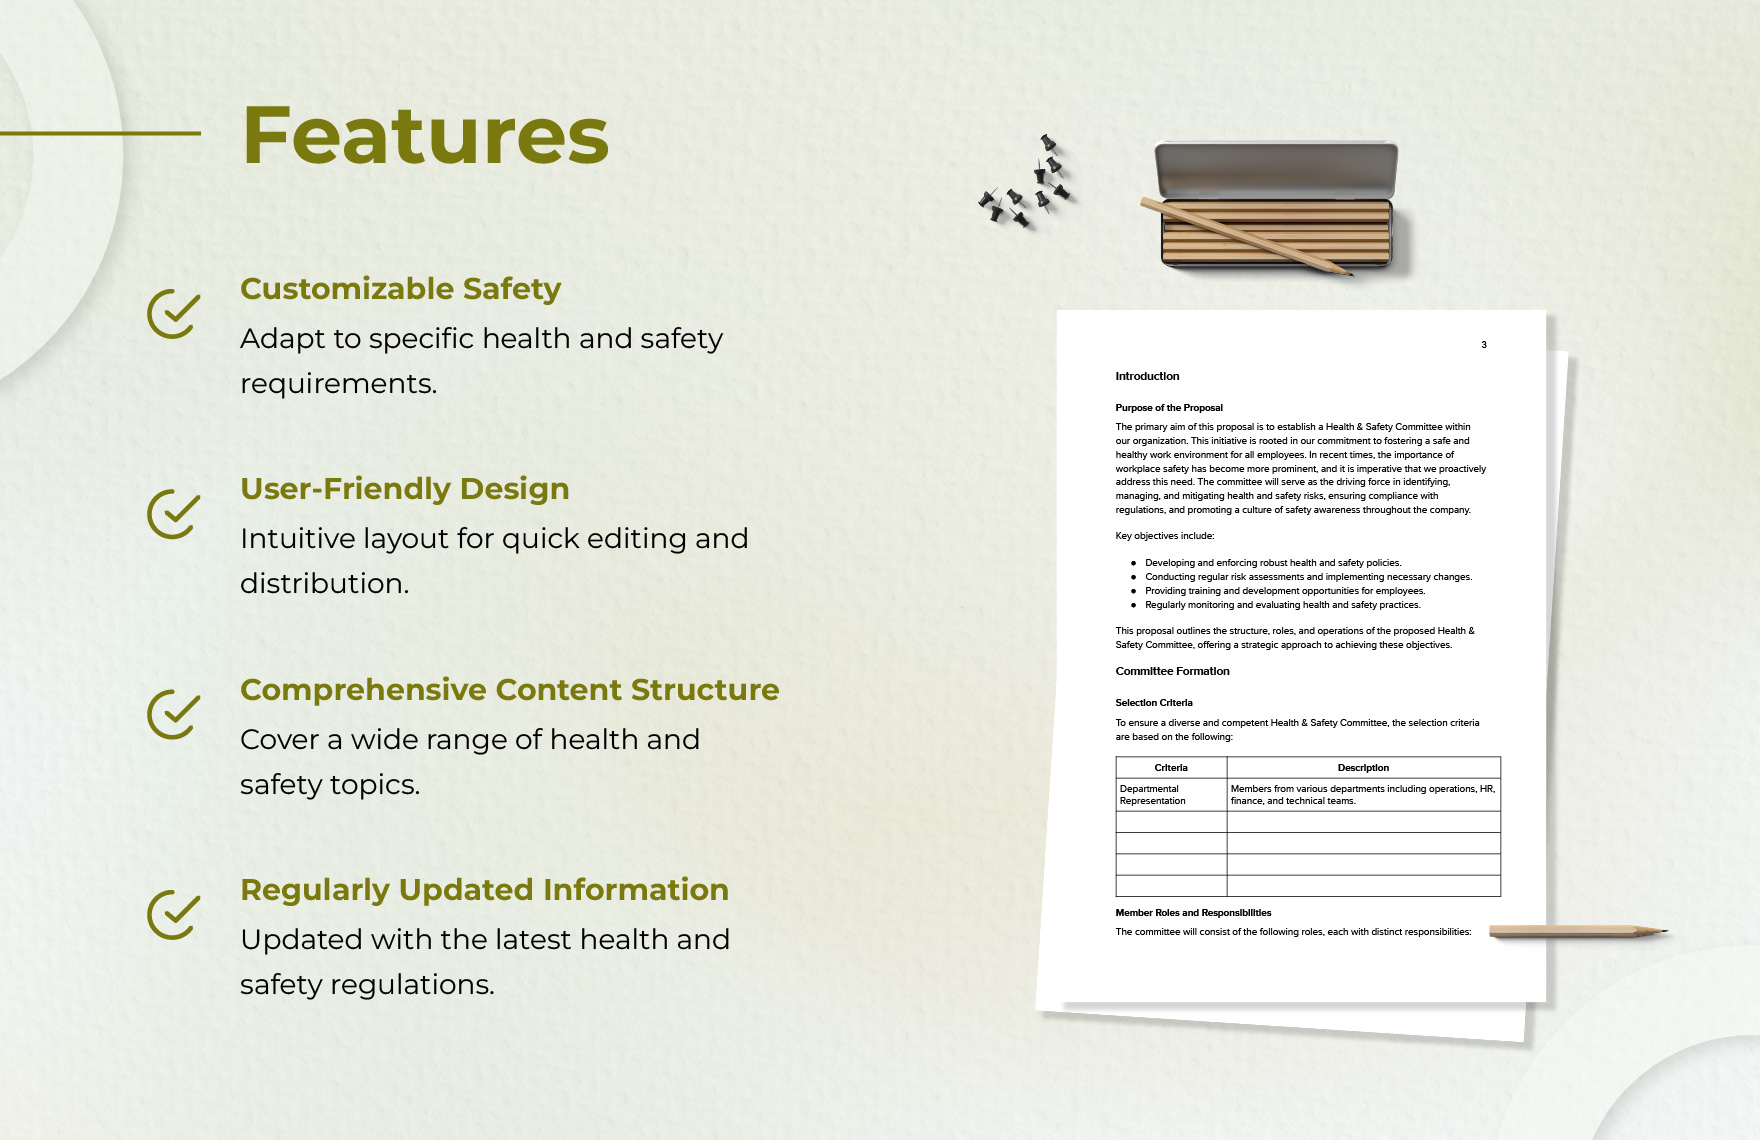 Health & Safety Committee Proposal Template